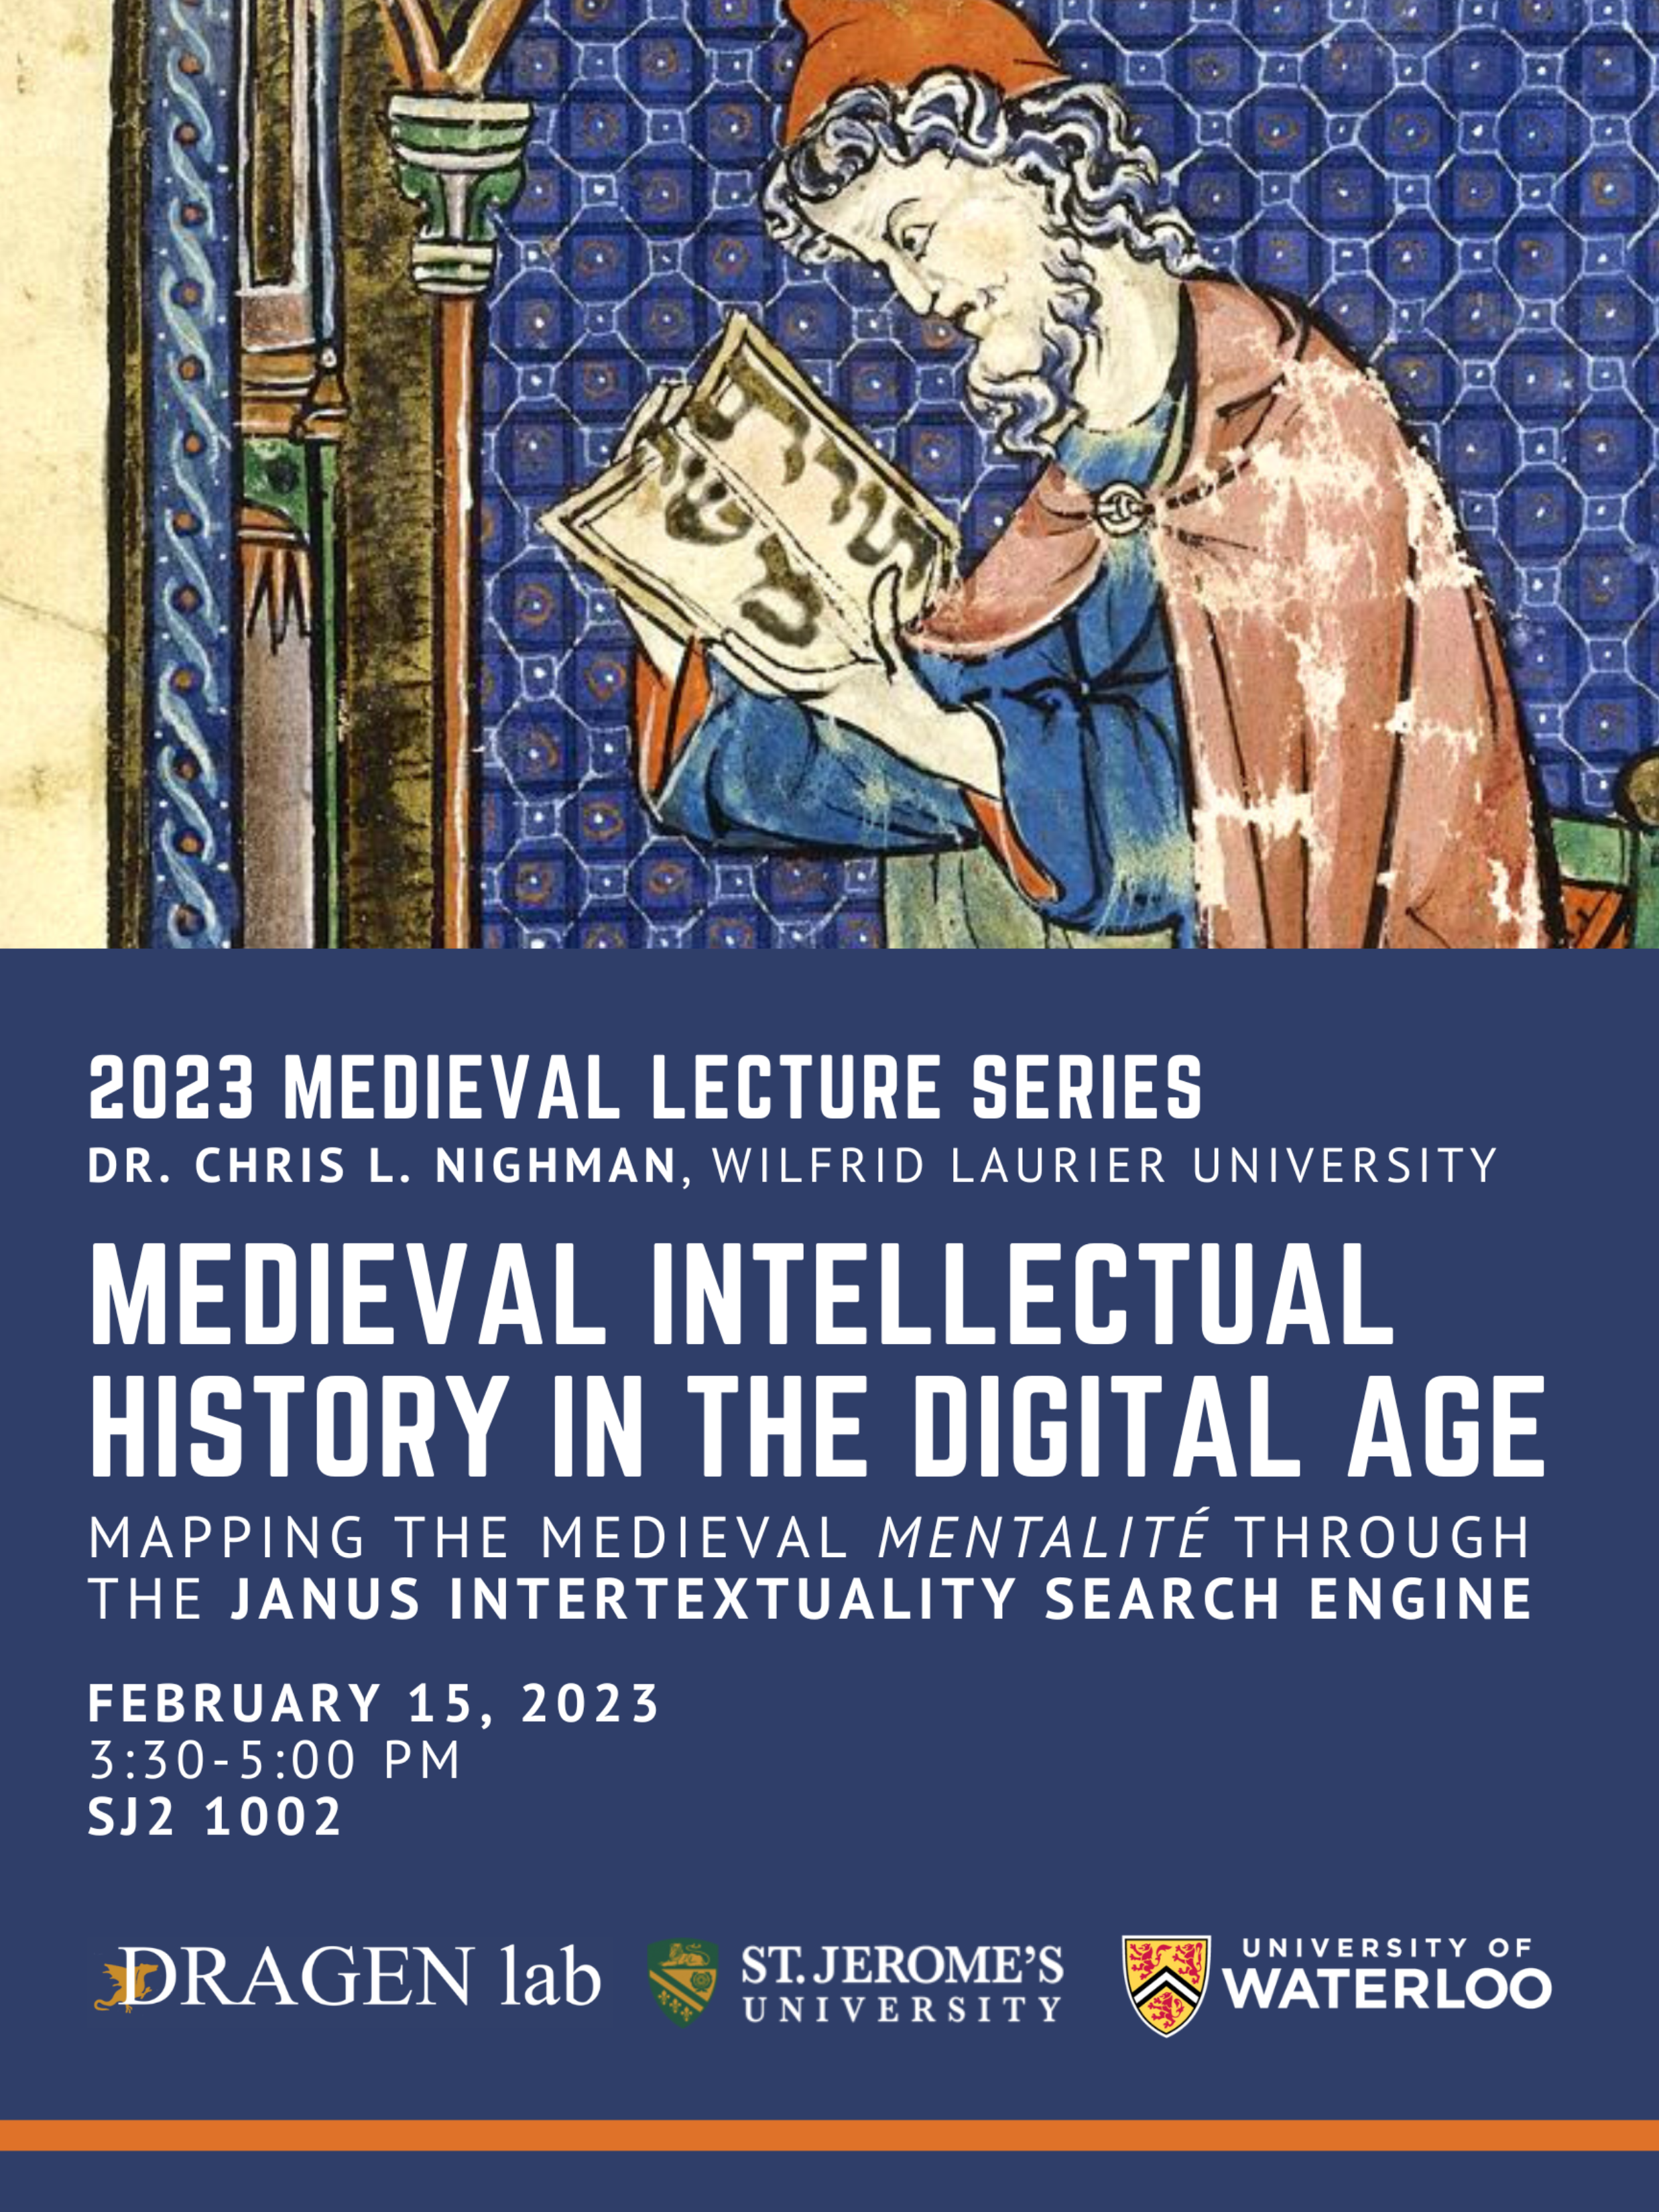 Medieval Lecture Series poster